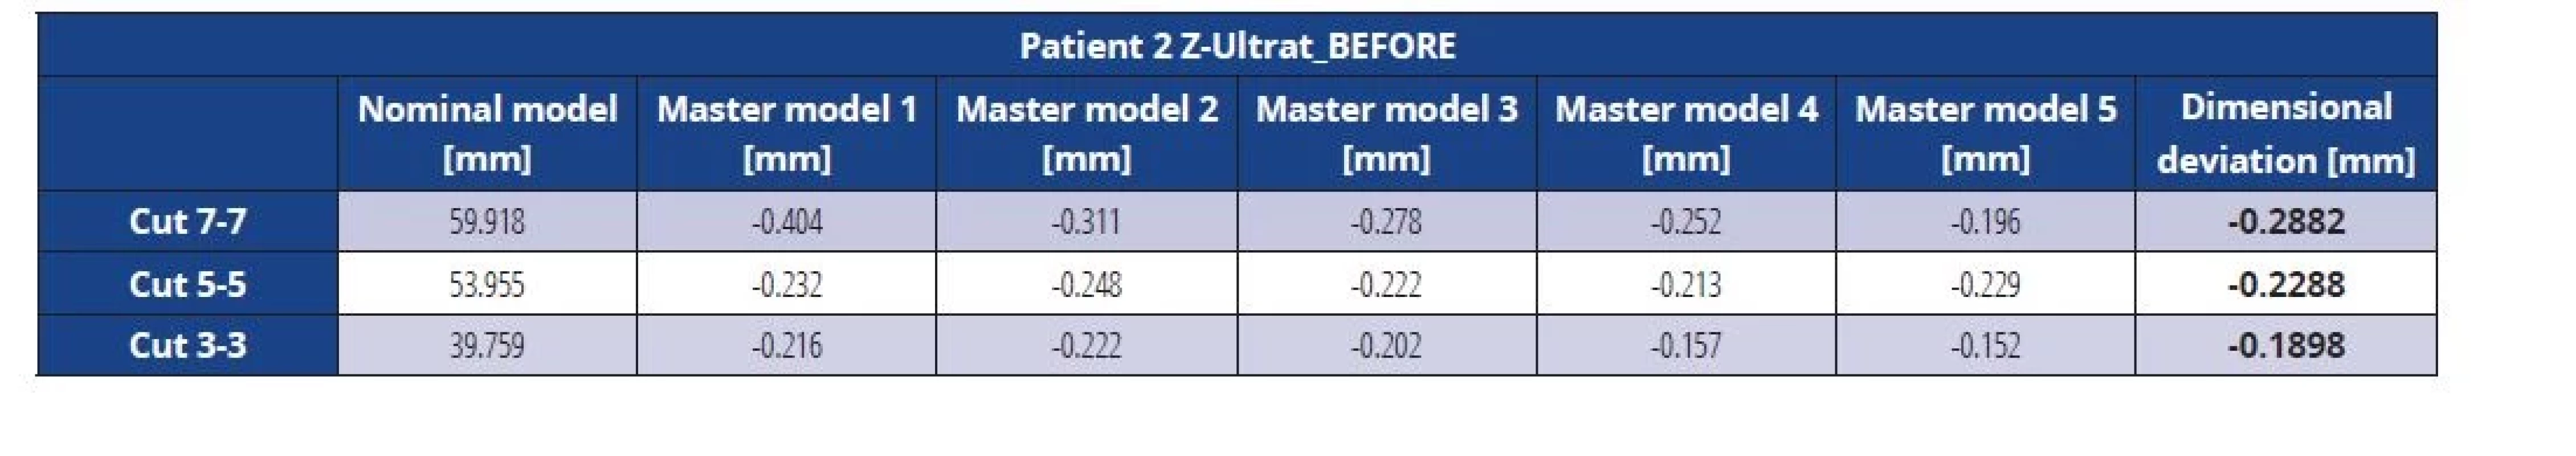 Dimensional deviations of the Z-Ultrat master model before vacuuming (patient 2)